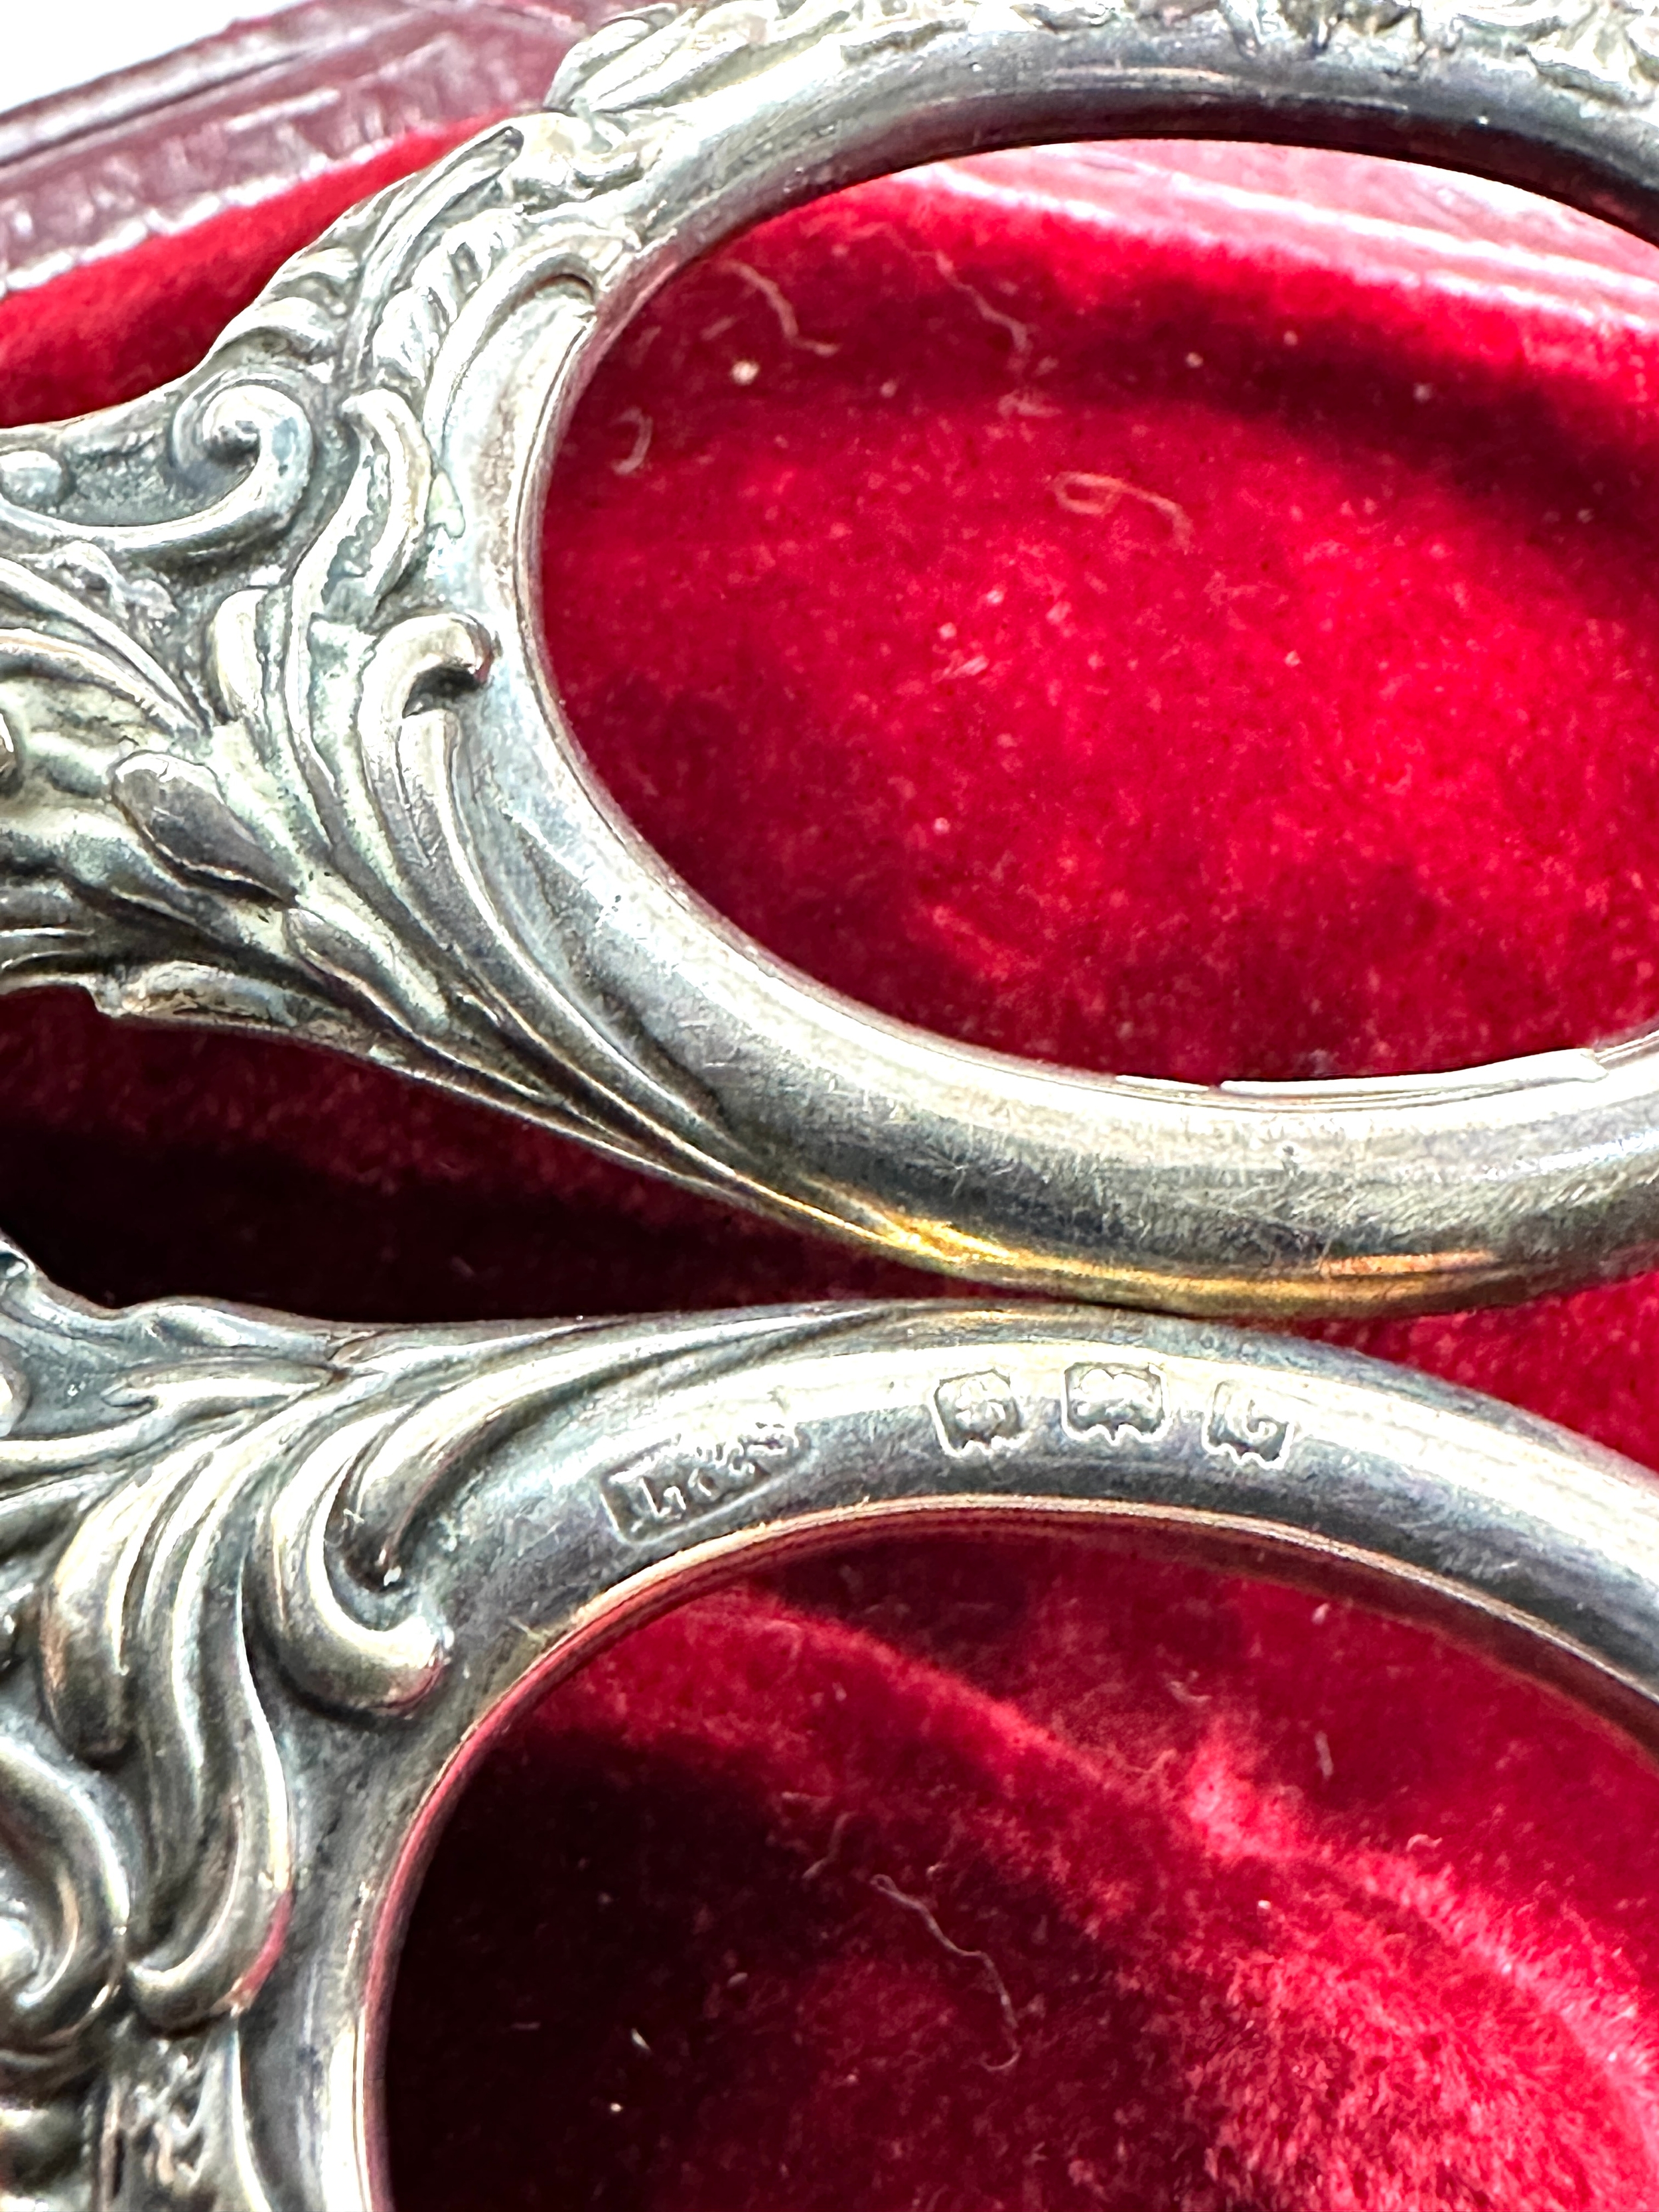 Fine large set of antique silver handle scissors original boxed by Lunds of London - Image 6 of 8